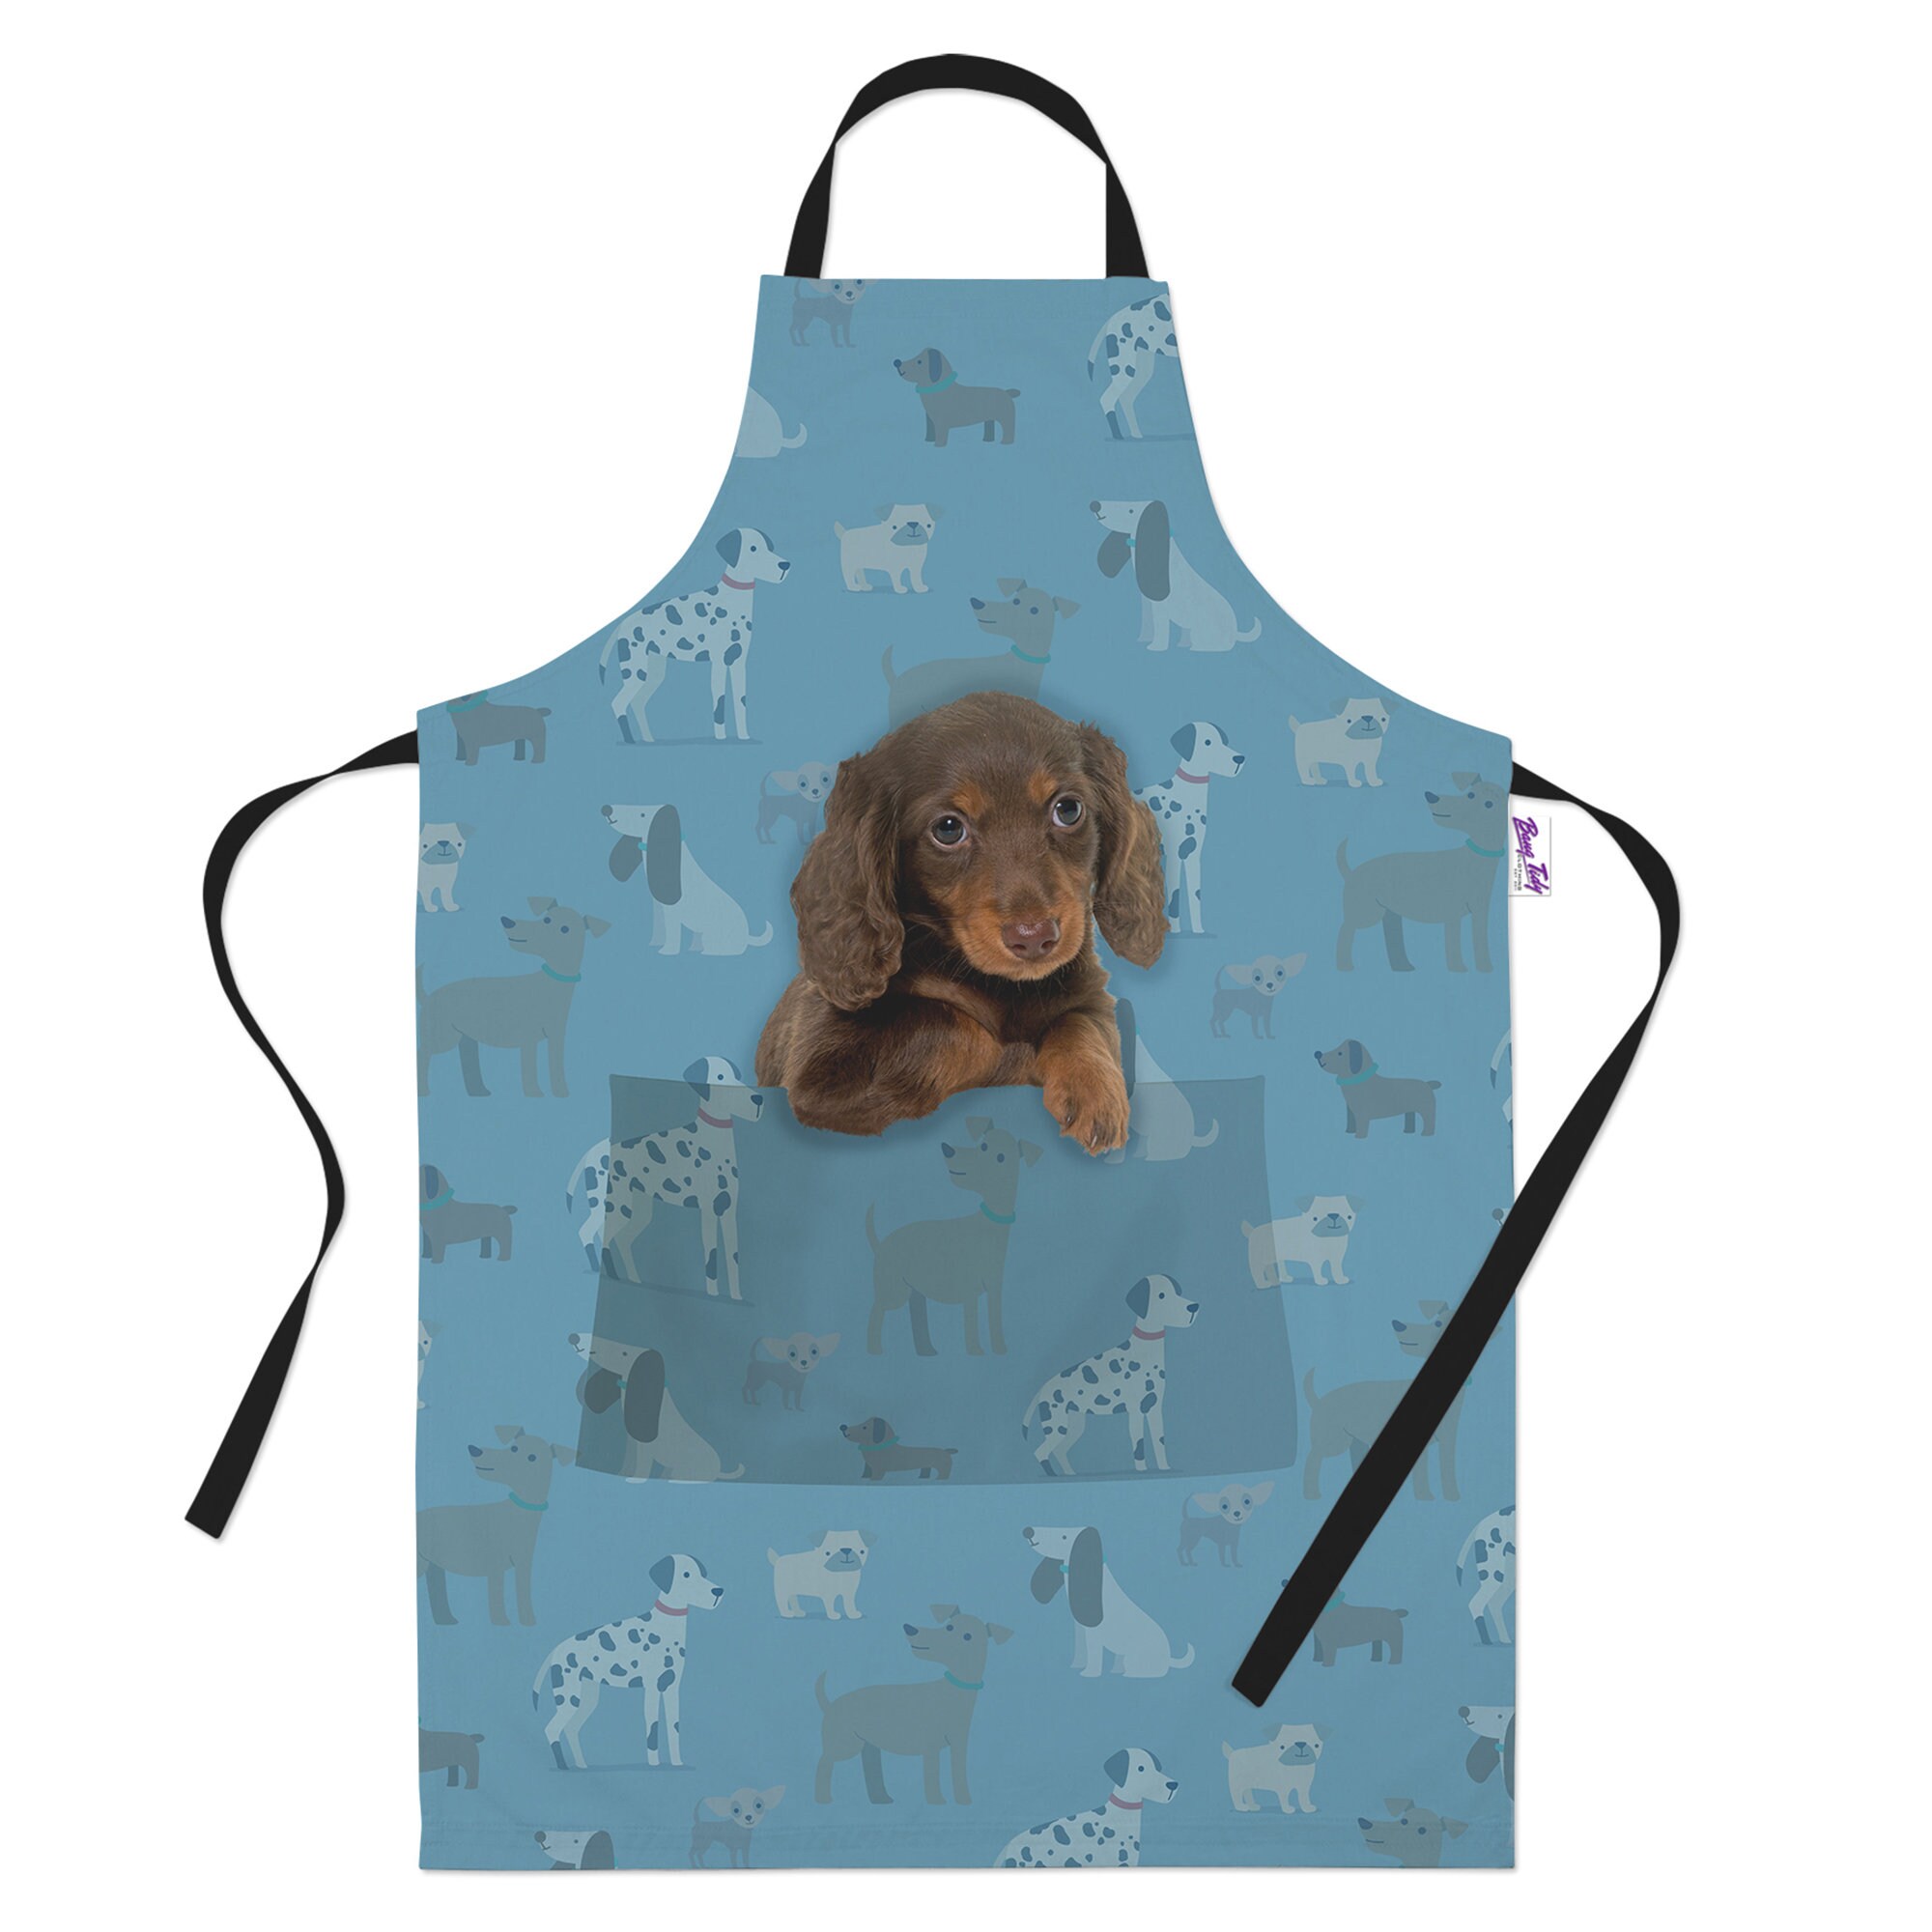 Cotton Dog Design Cooksmart Best in Show Apron for Adults with Pocket 